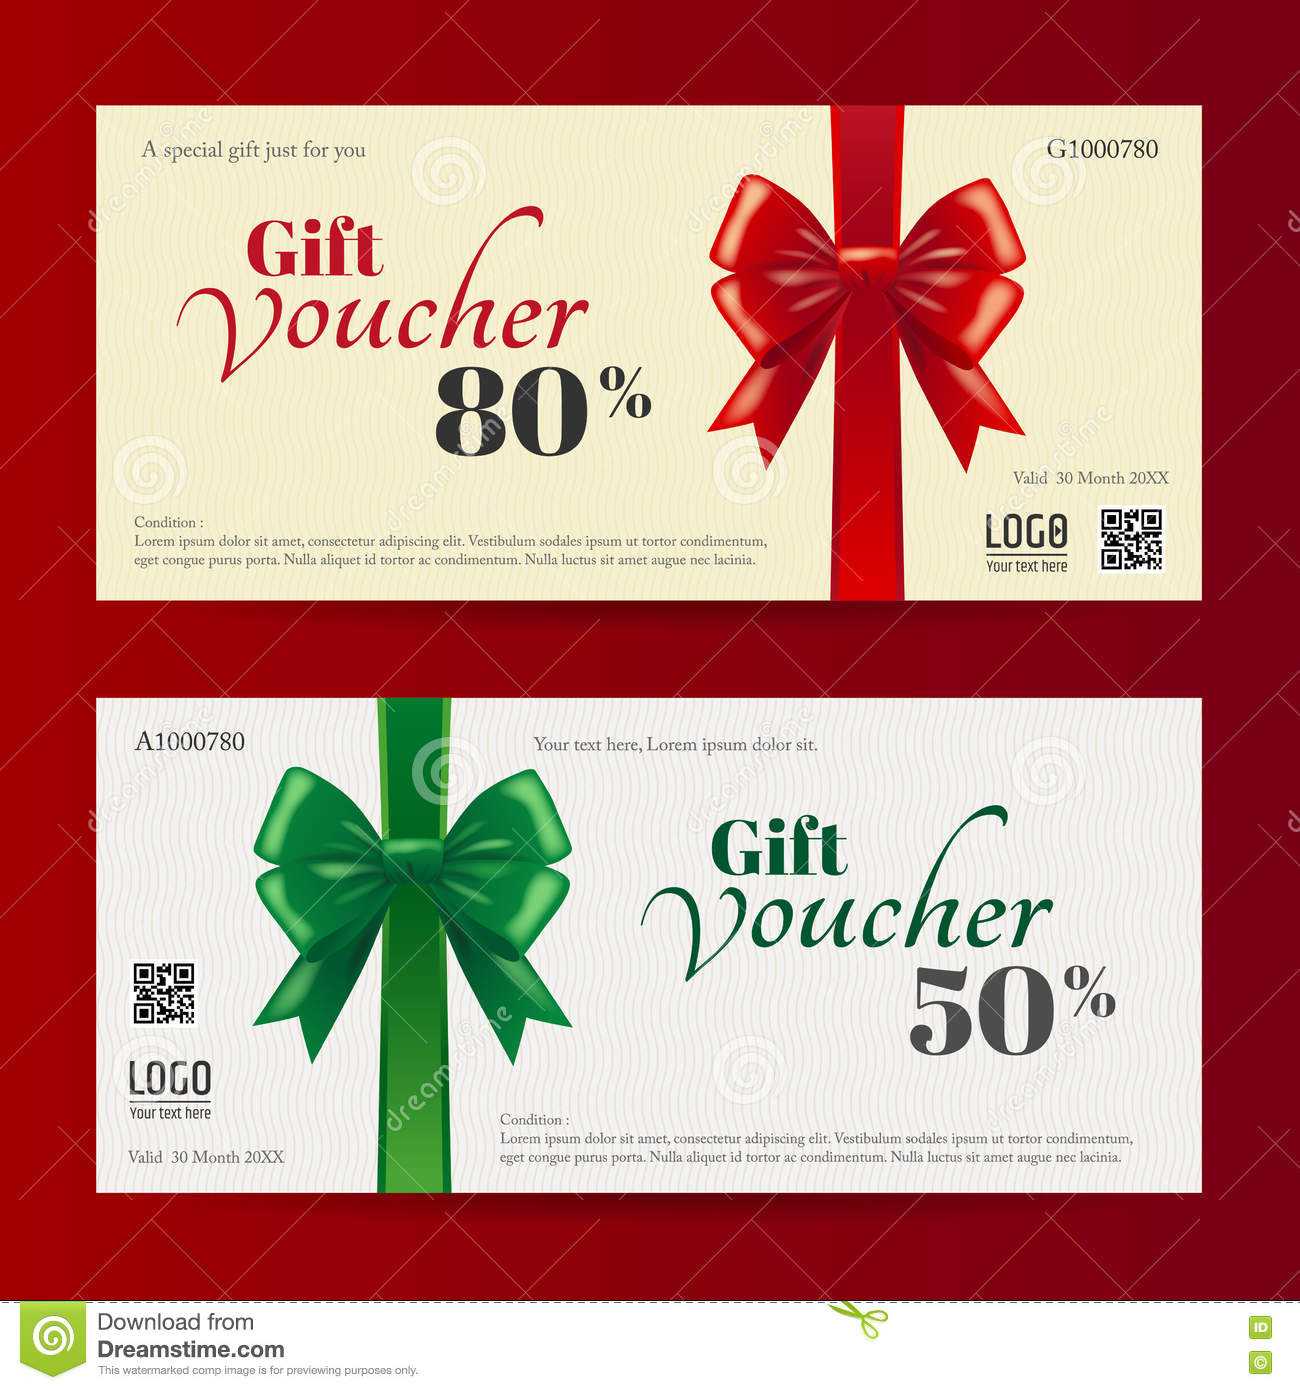 Elegant Christmas Gift Card Or Gift Voucher Template Stock For Christmas Gift Certificate Template Free Download